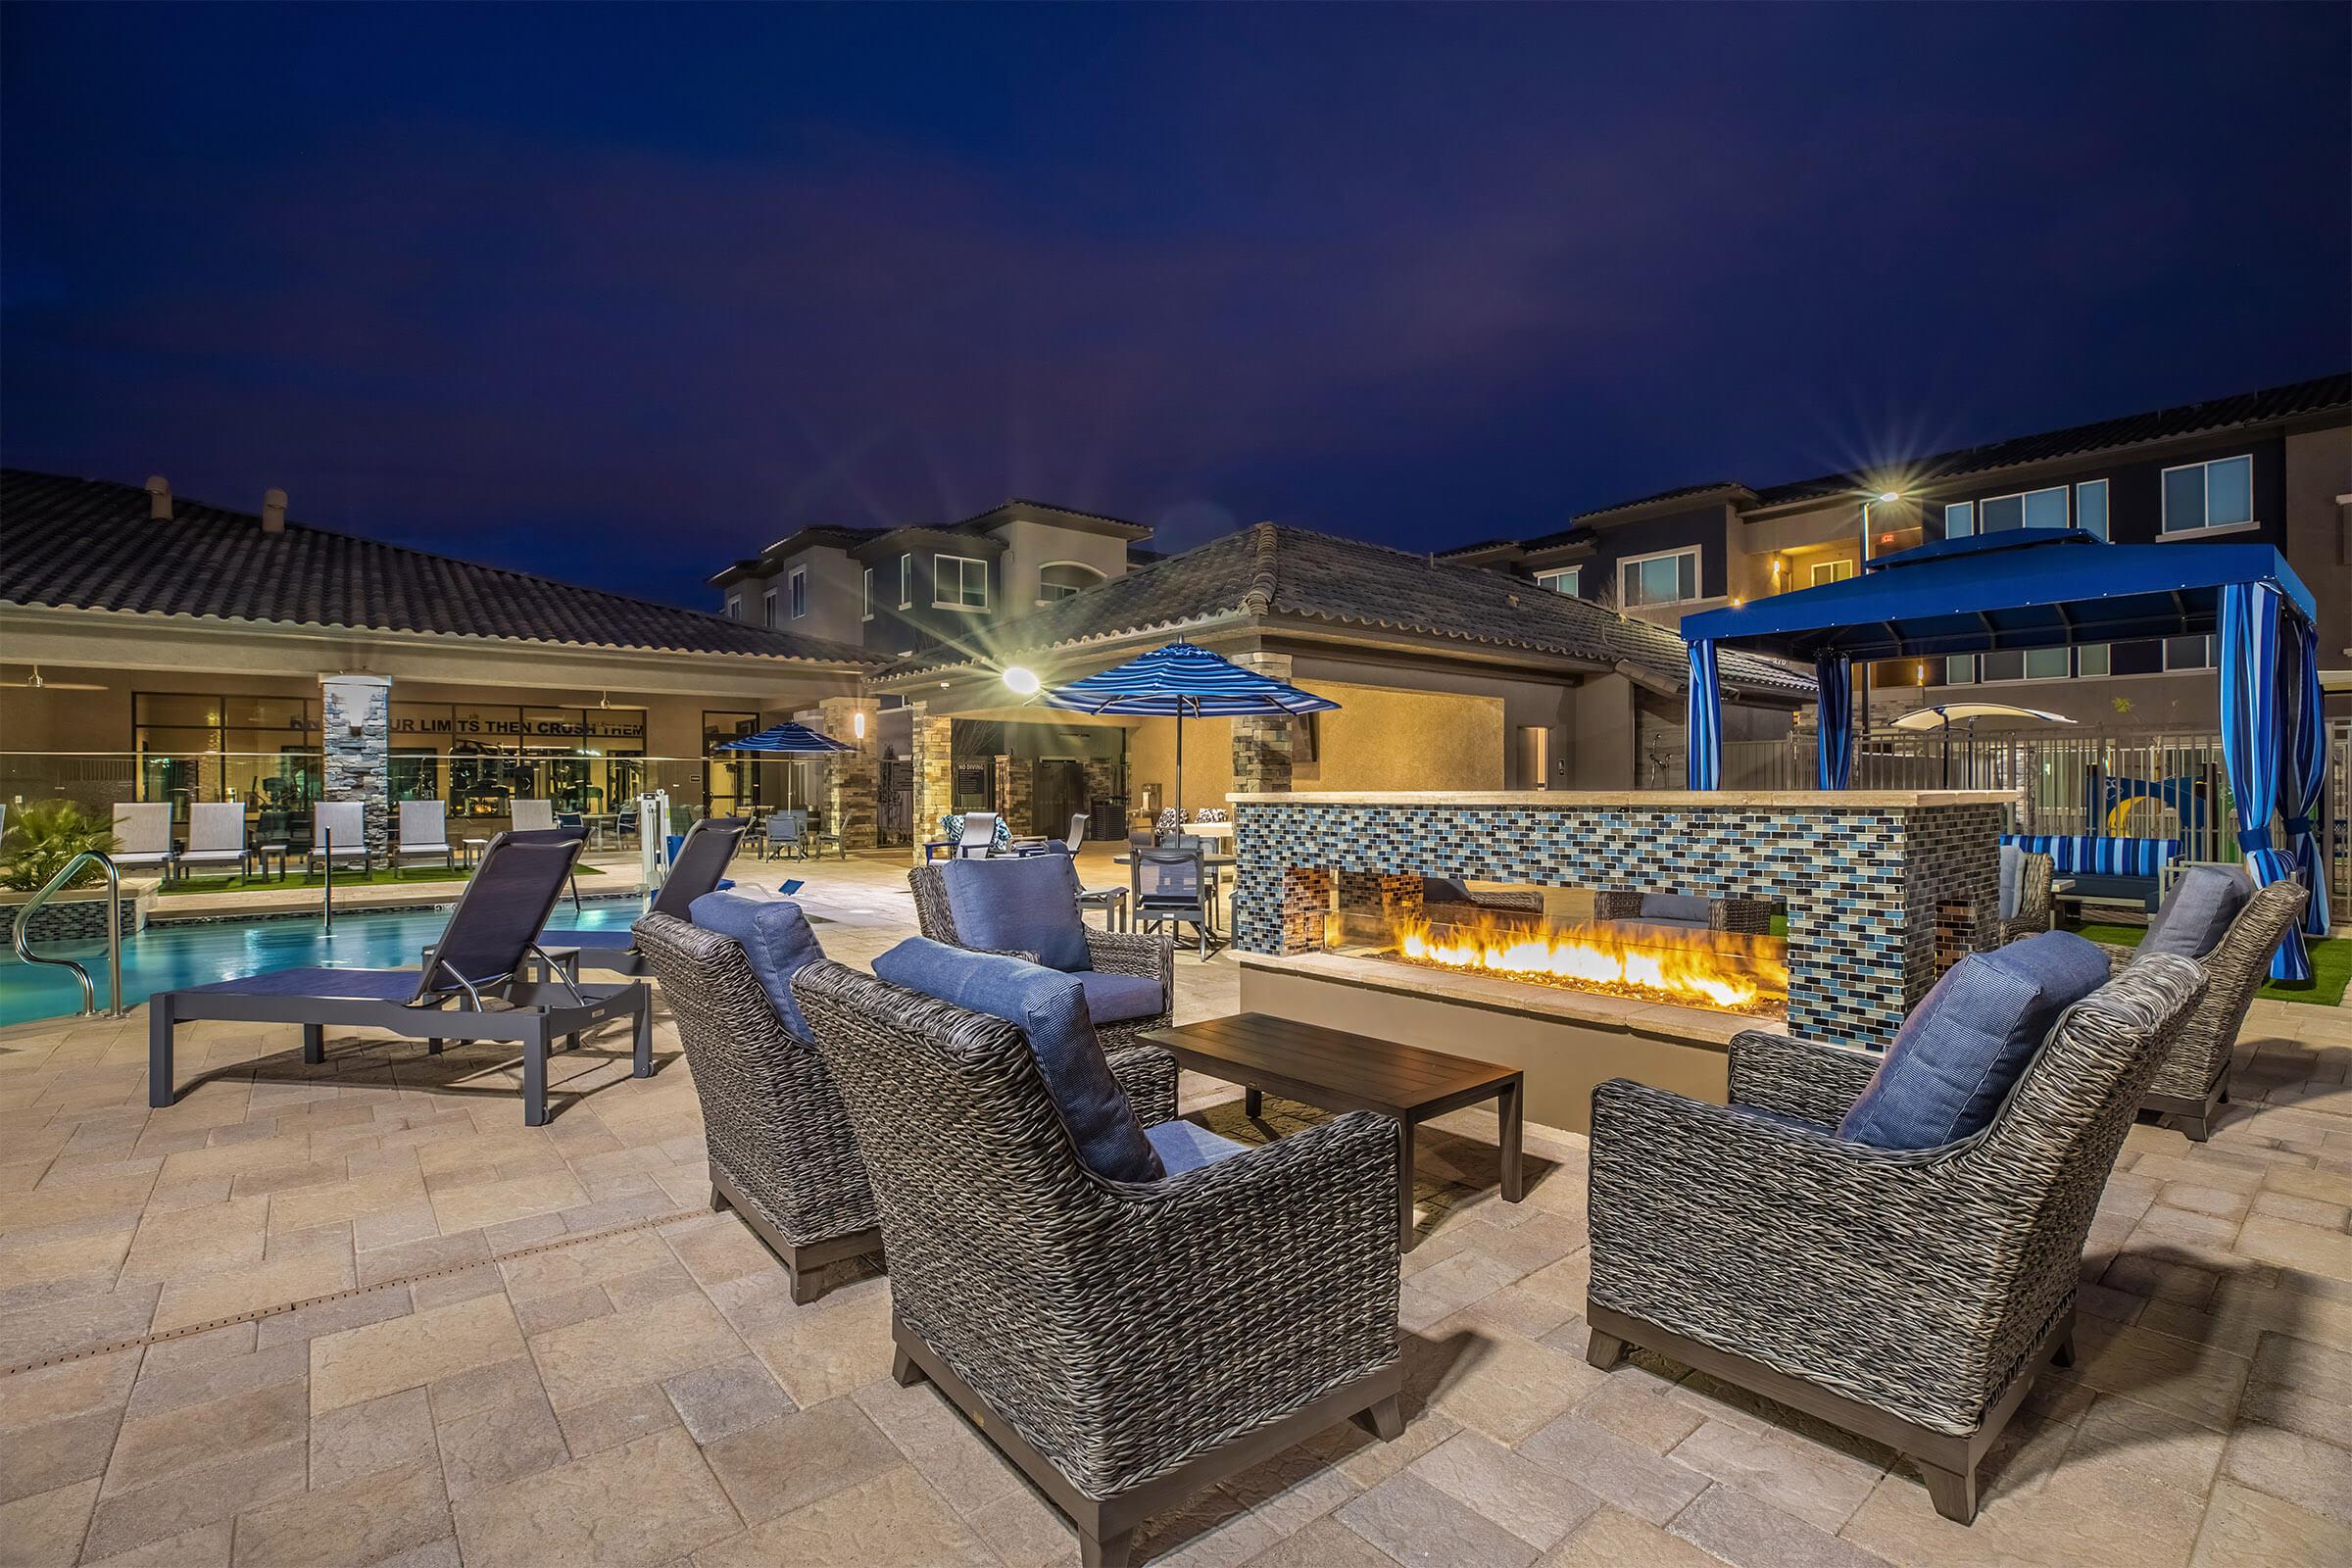 Blue wicker chairs in front of the outdoor fireplace